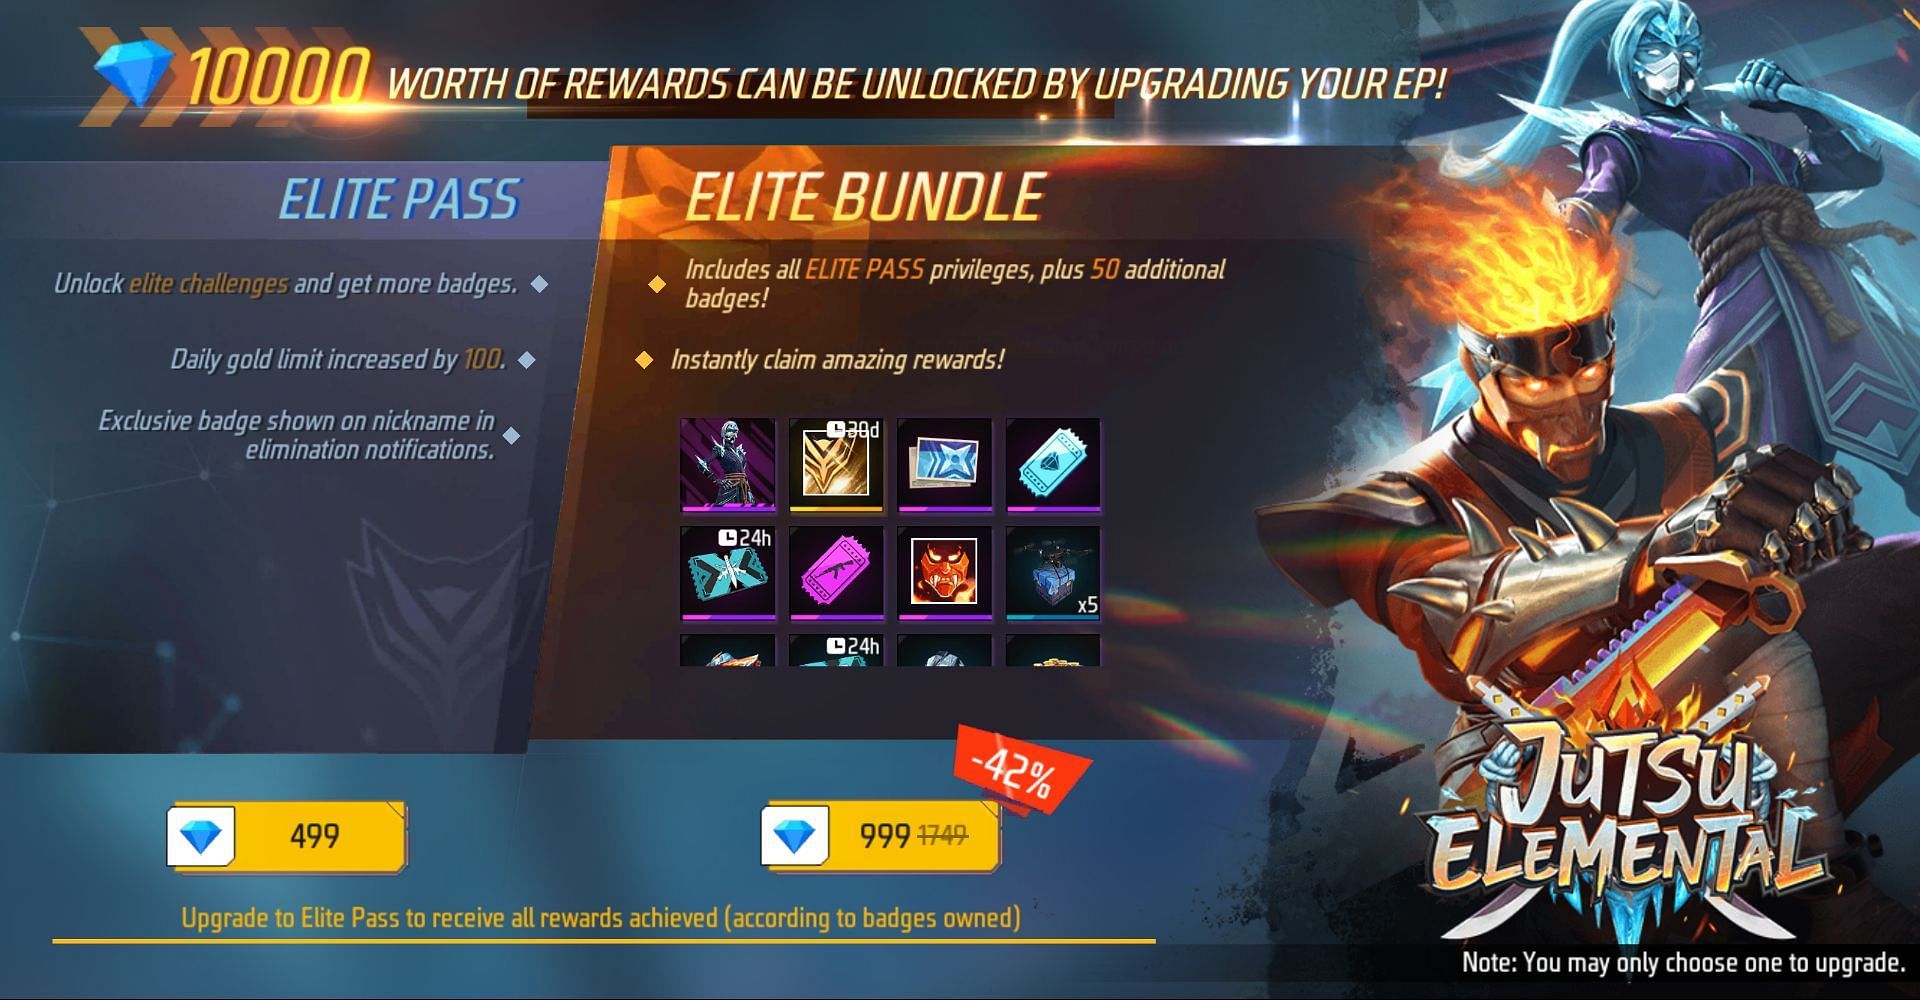 The two available upgrades (Image via Garena)